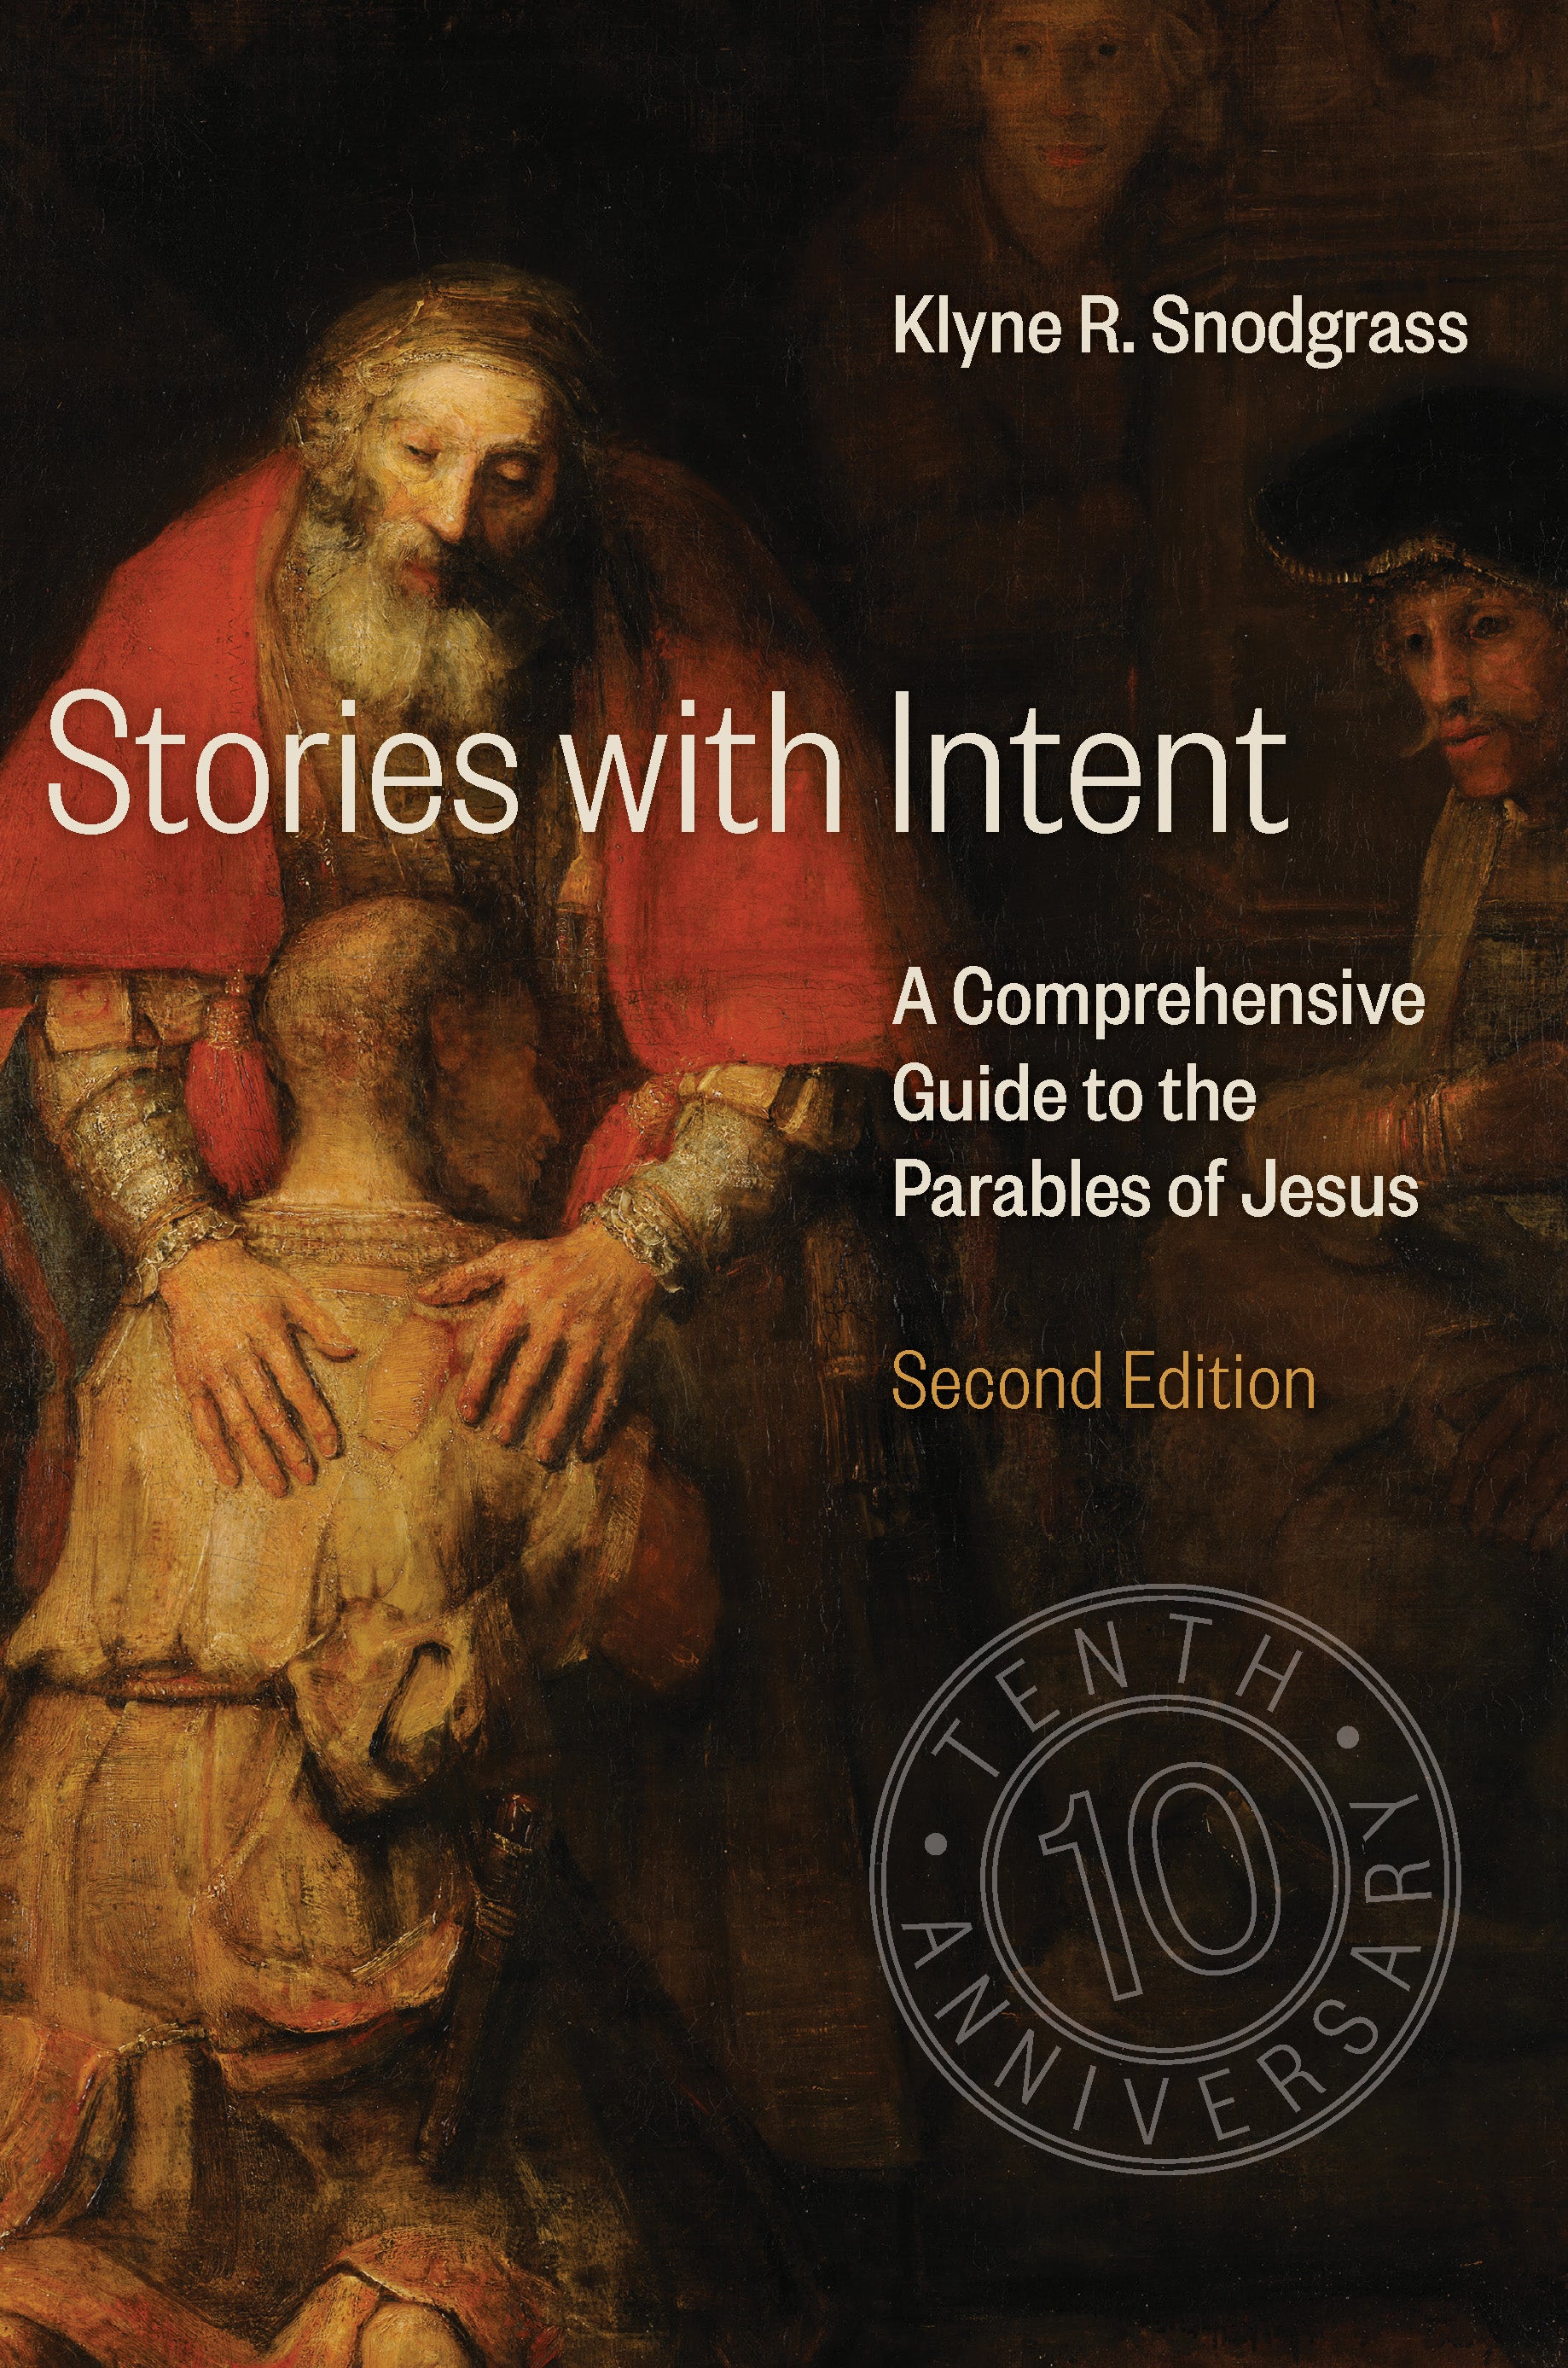 Image of Stories with Intent other